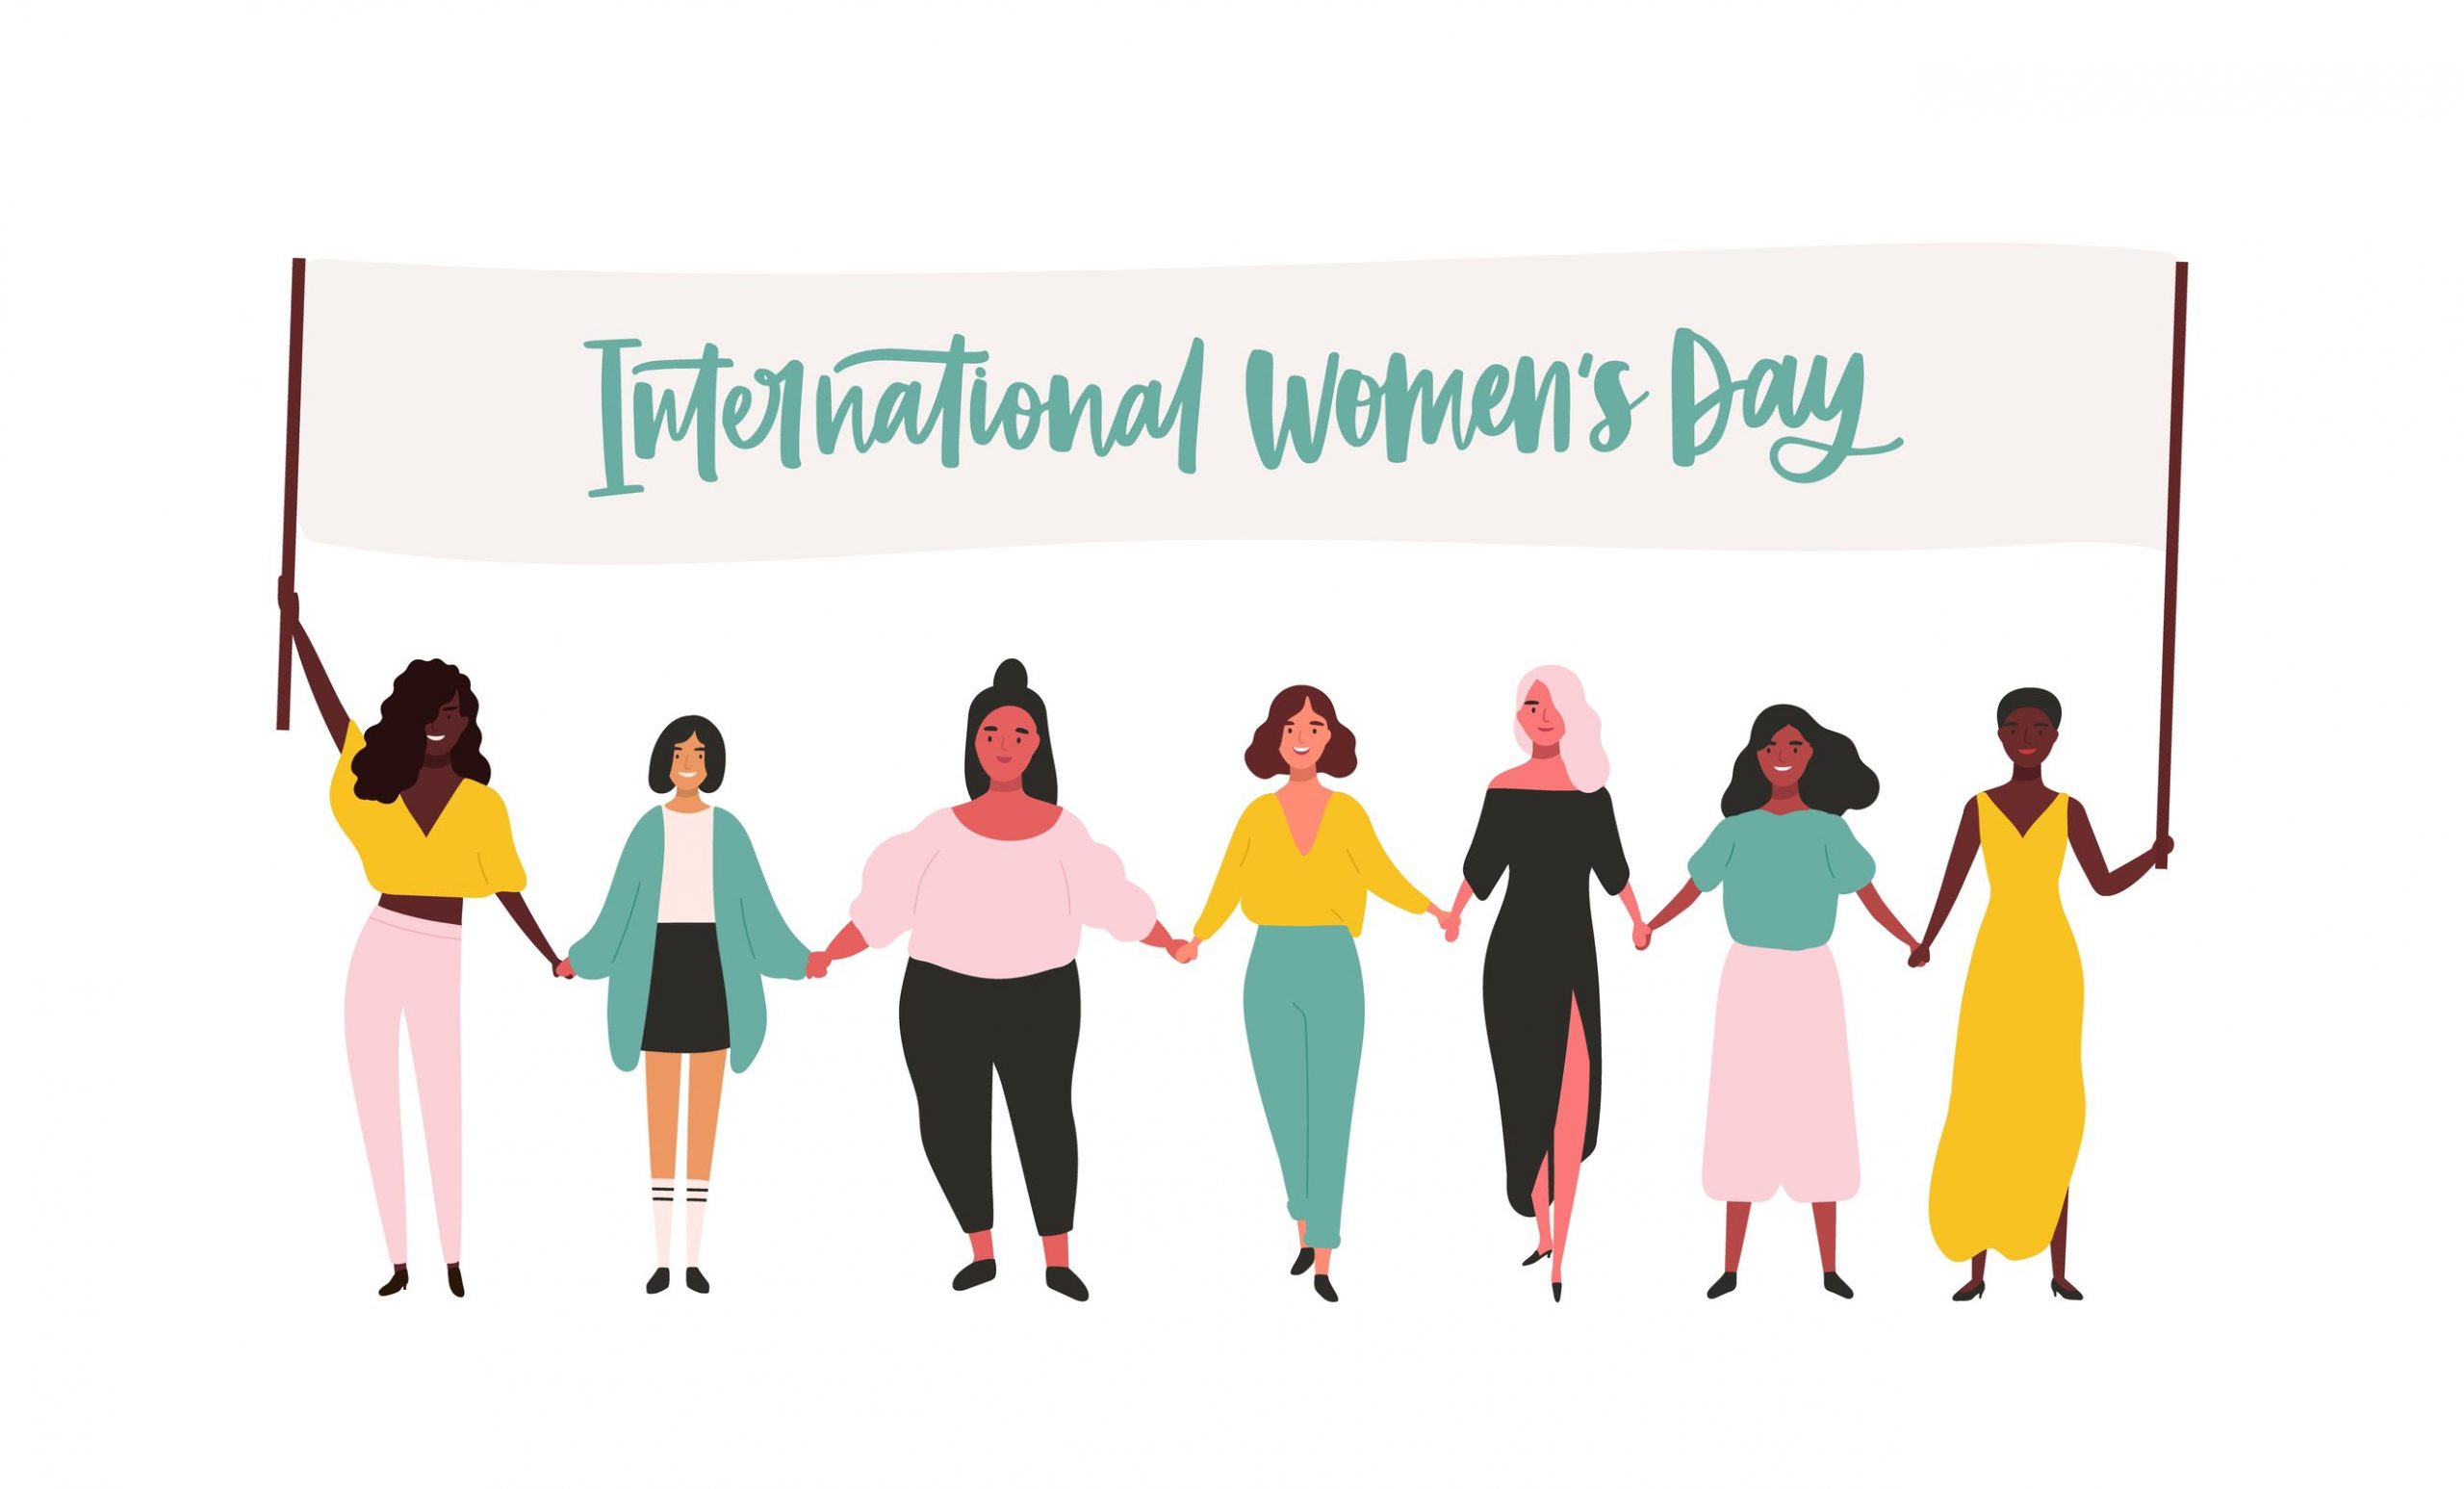 111th International Women’s Day is being celebrated